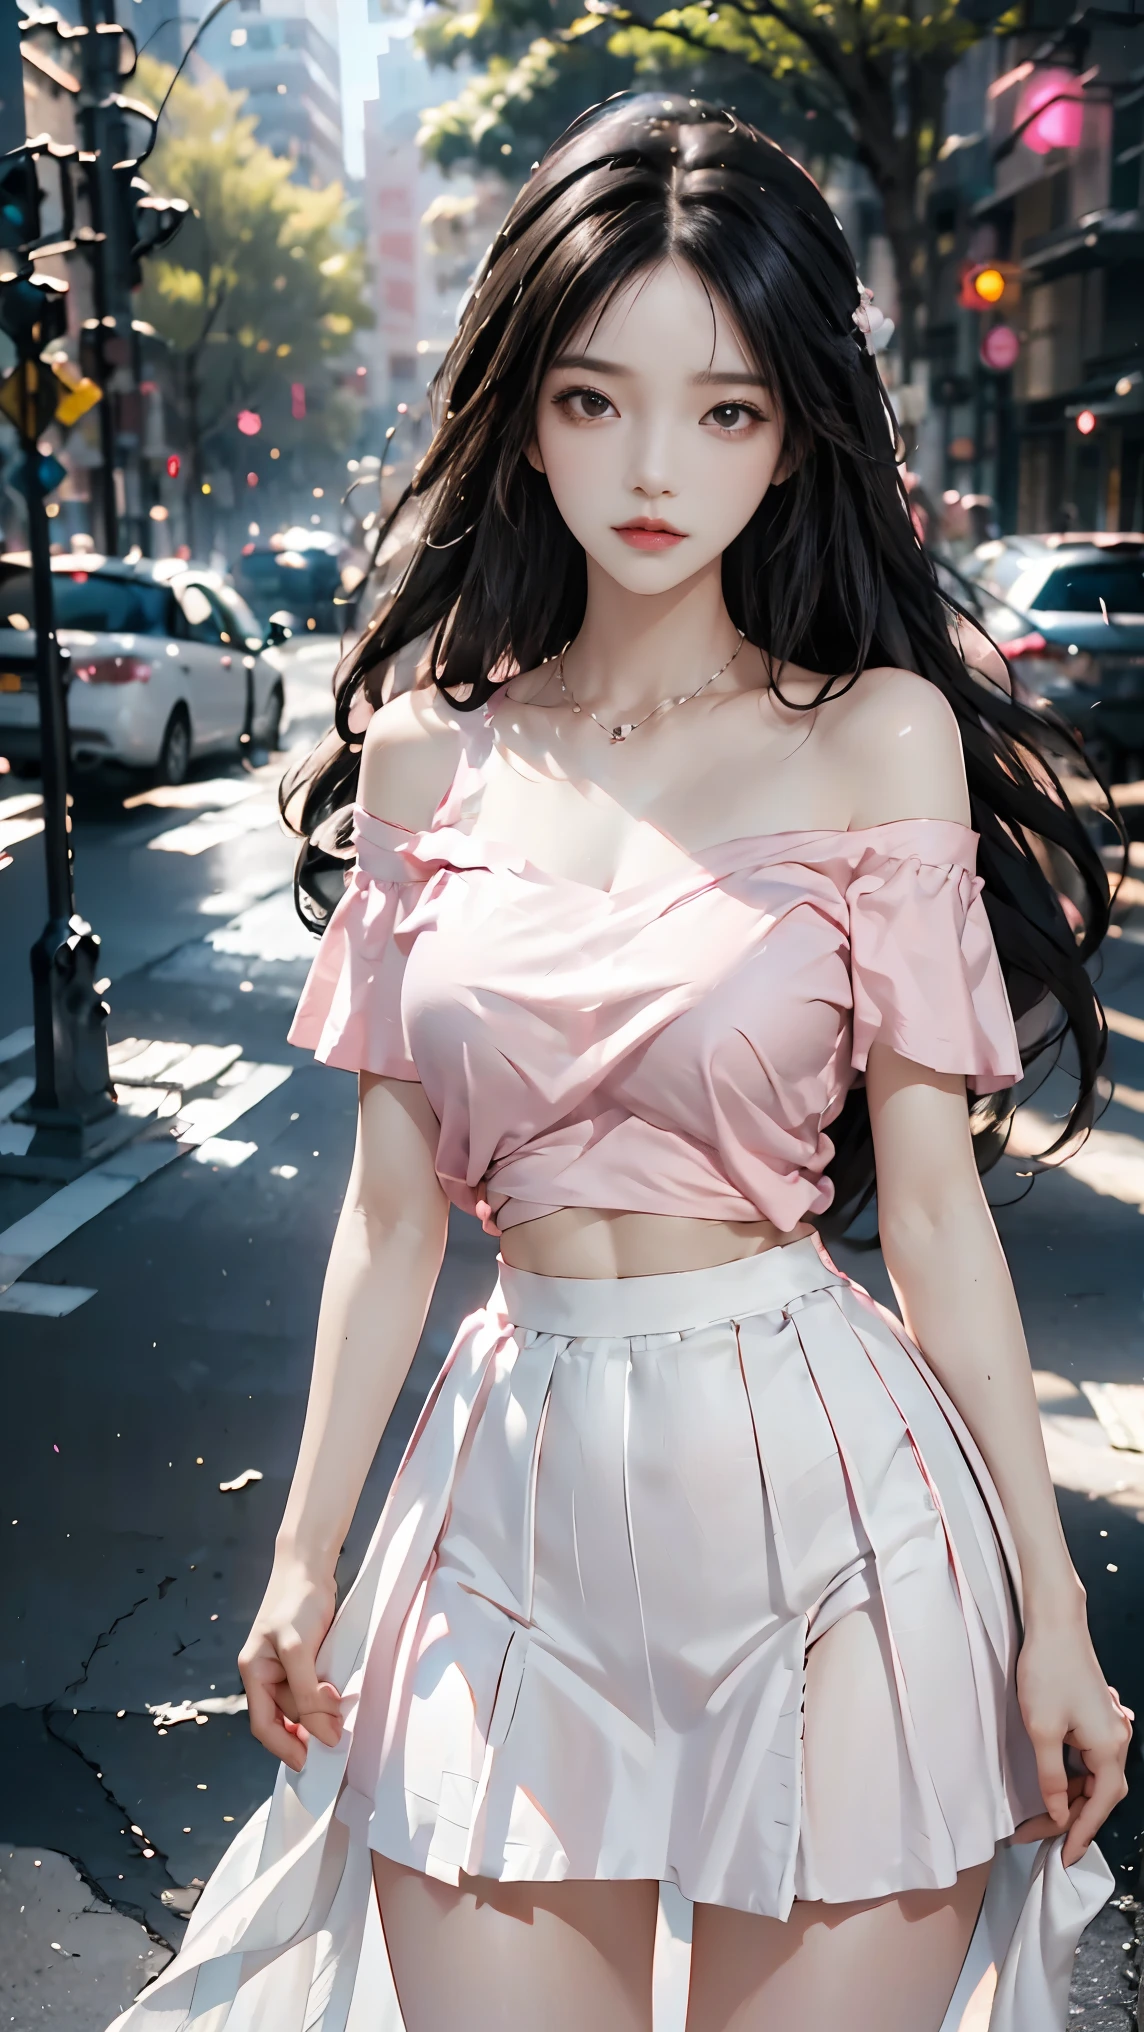 1girl, look at viewer, standing, in park, black hair, hair bang, hairstyles, in the style of pink e and light off shoulder t-shirts, abs stomach, skirt, dreamy and romantic compositions, white, playful arrangements, fantasy, high contrast, ink strokes, over exposure, pink and white tone impression, attractive pose,